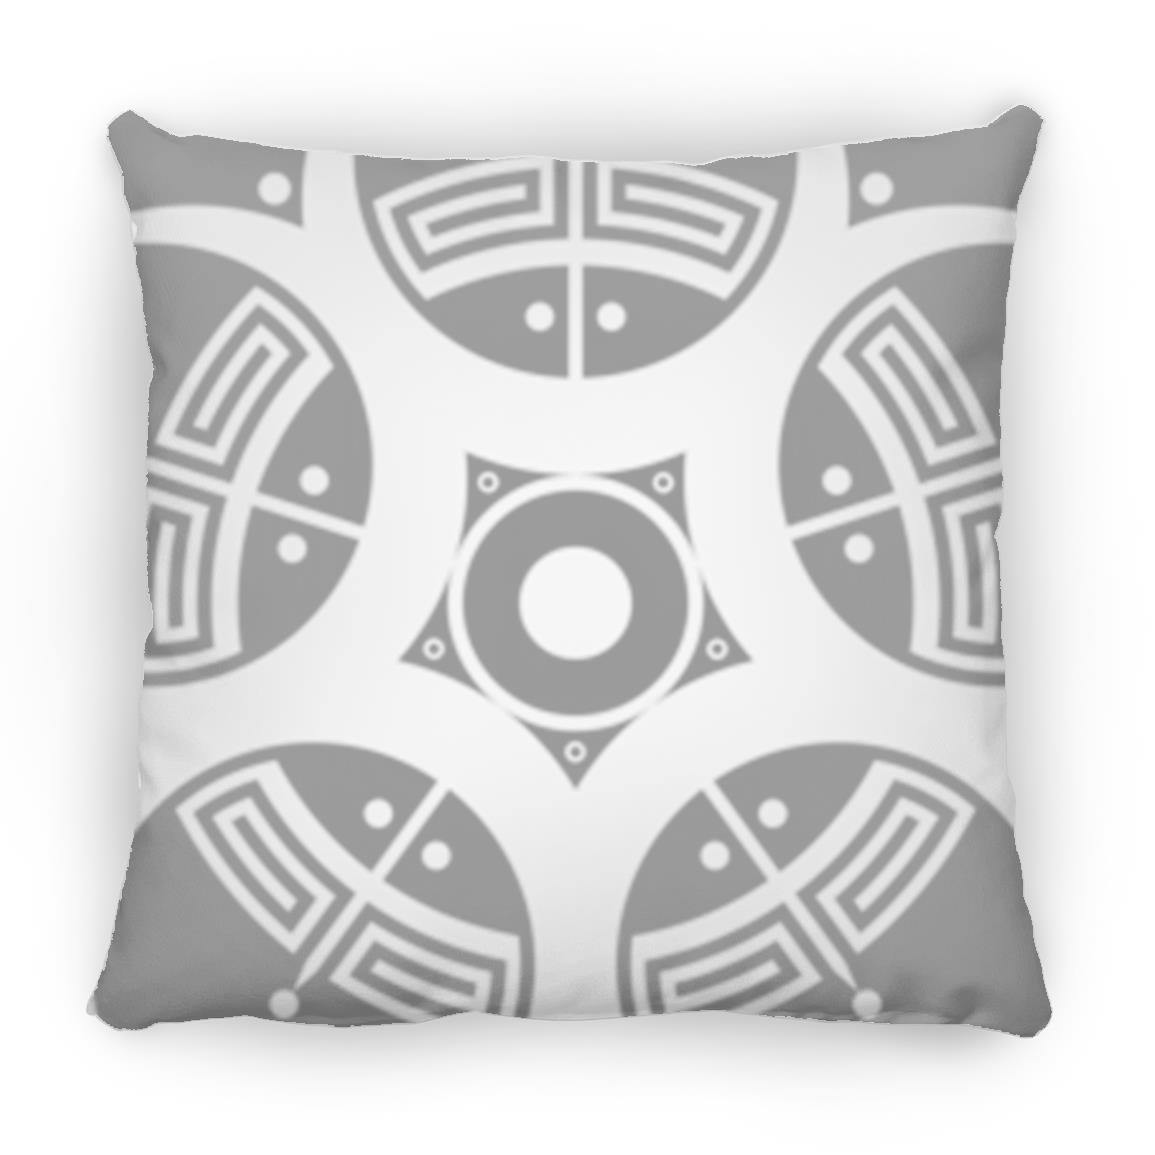 Crop Circle Pillow - Roundway Hill 2 - Shapes of Wisdom